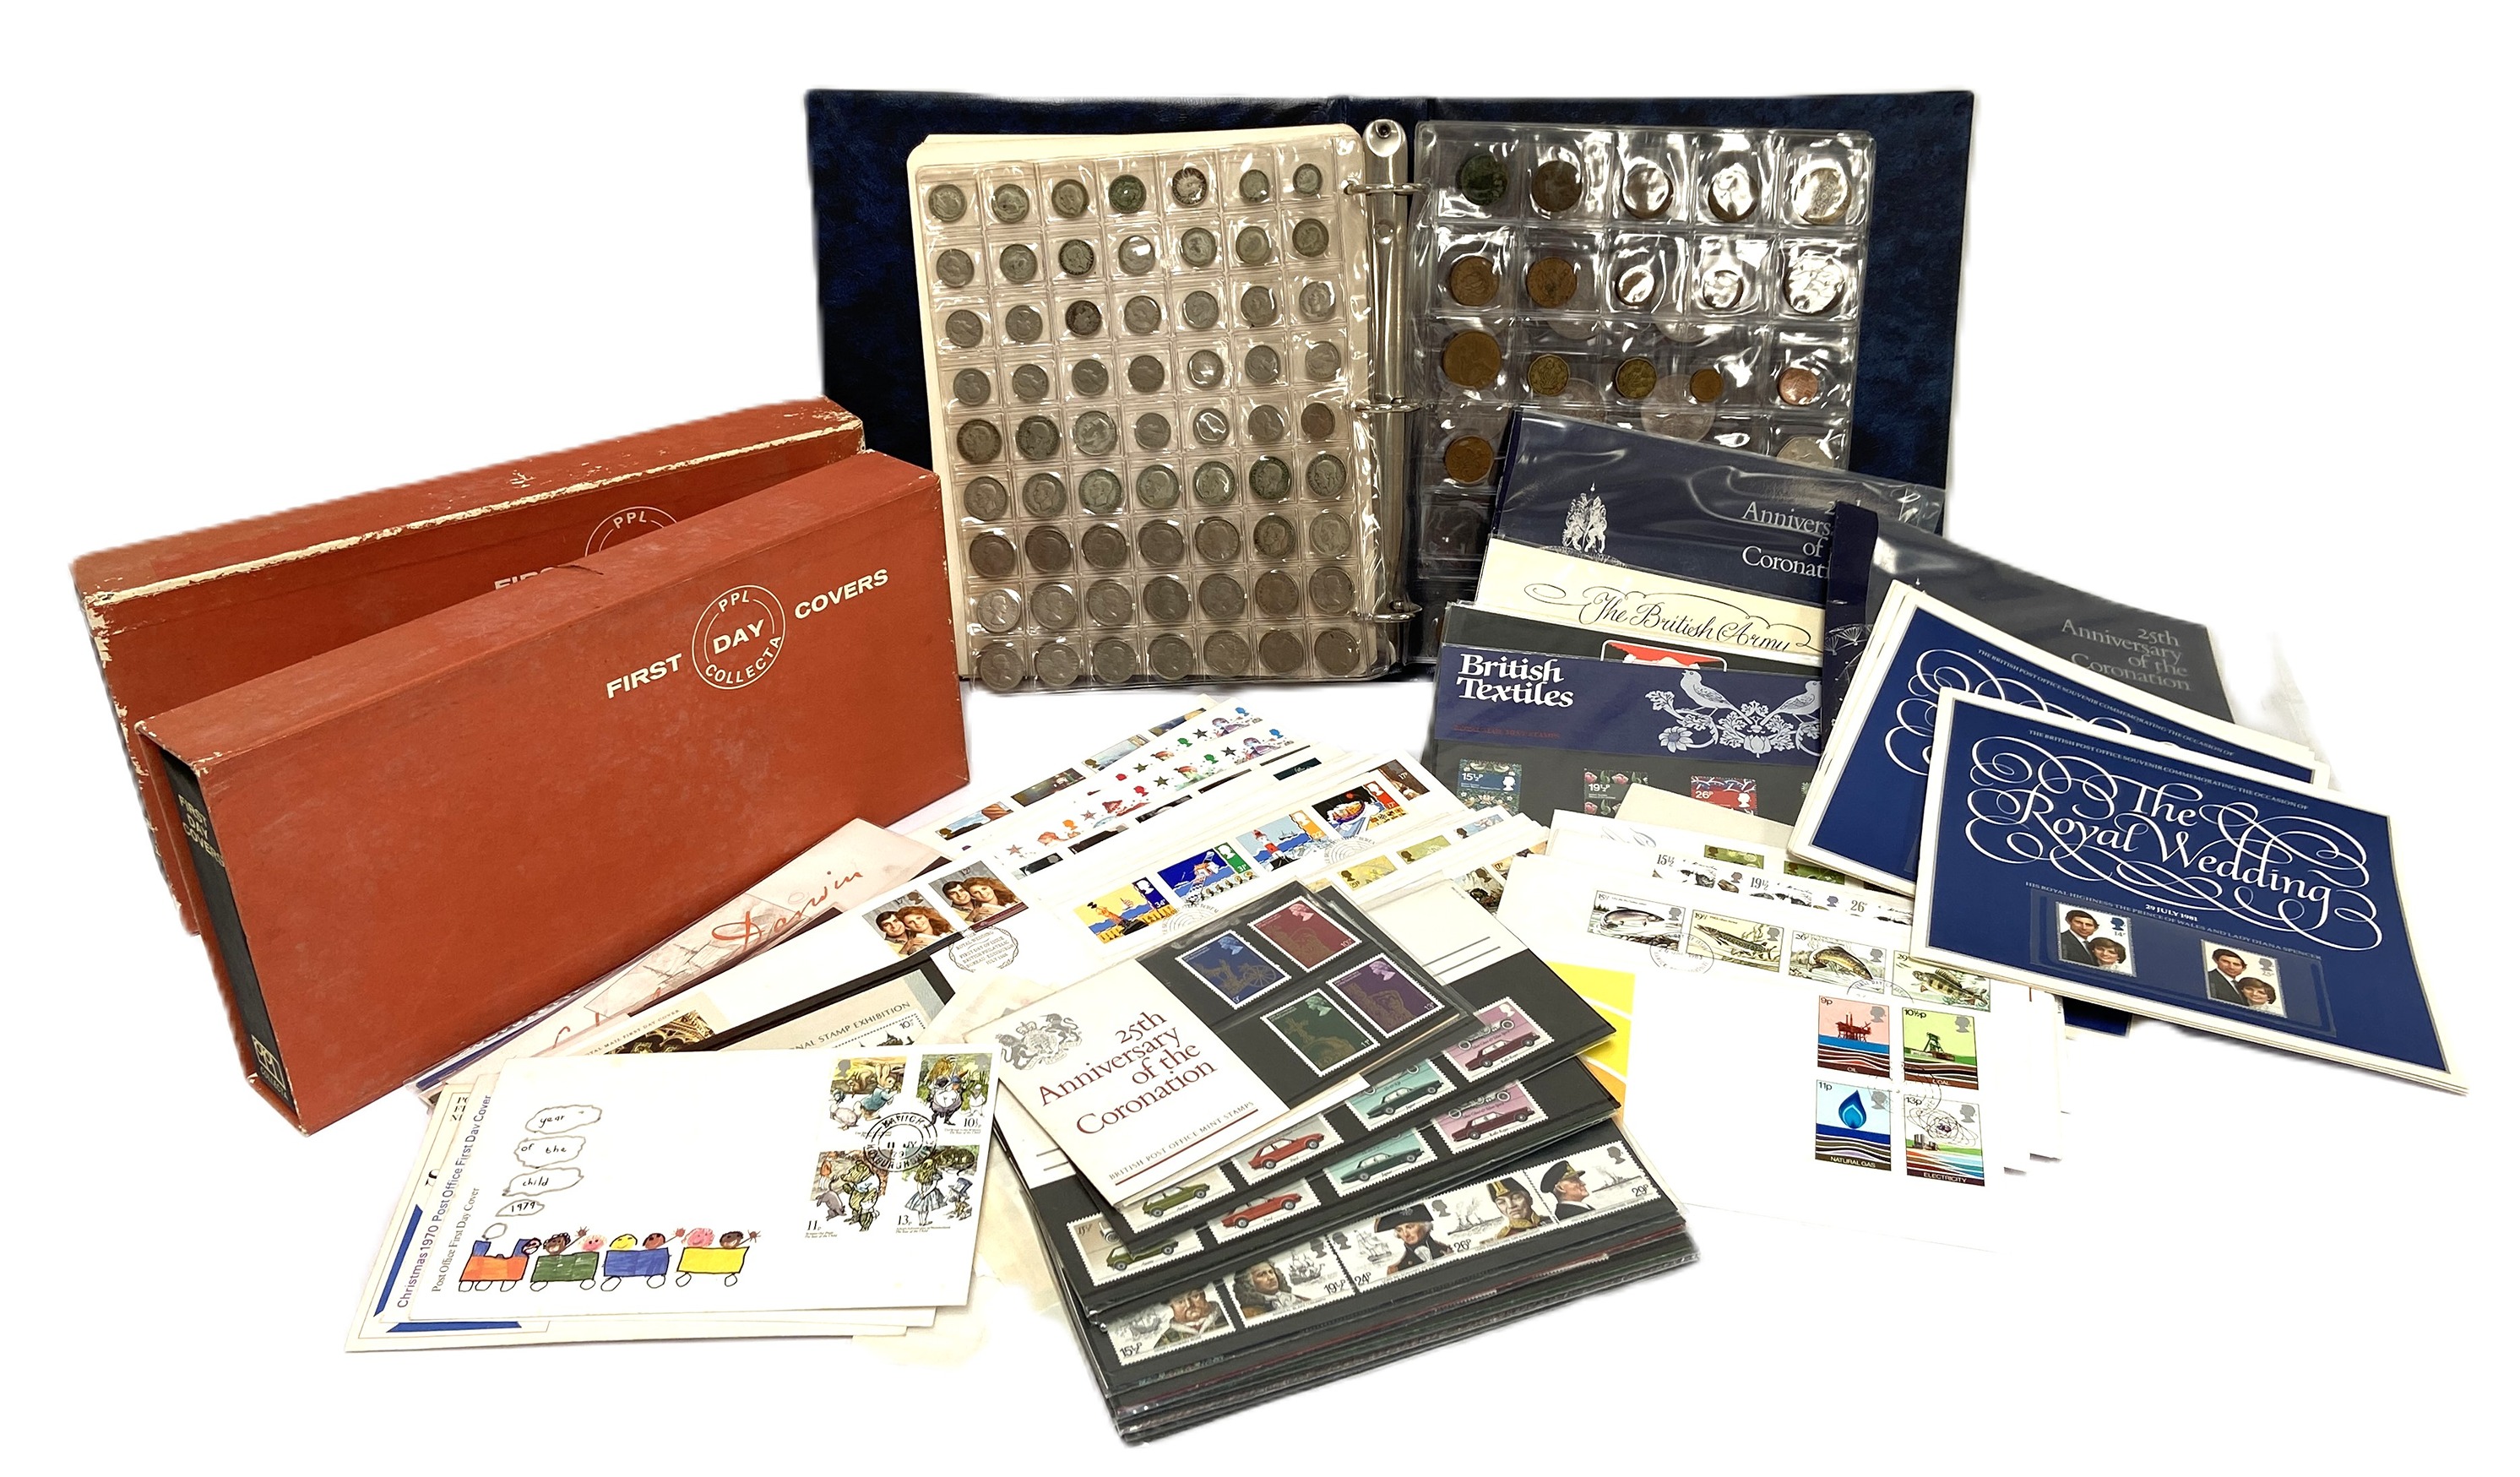 STAMPS: A group of assorted First Day Covers and commemorative stamps including 1981 Royal Wedding